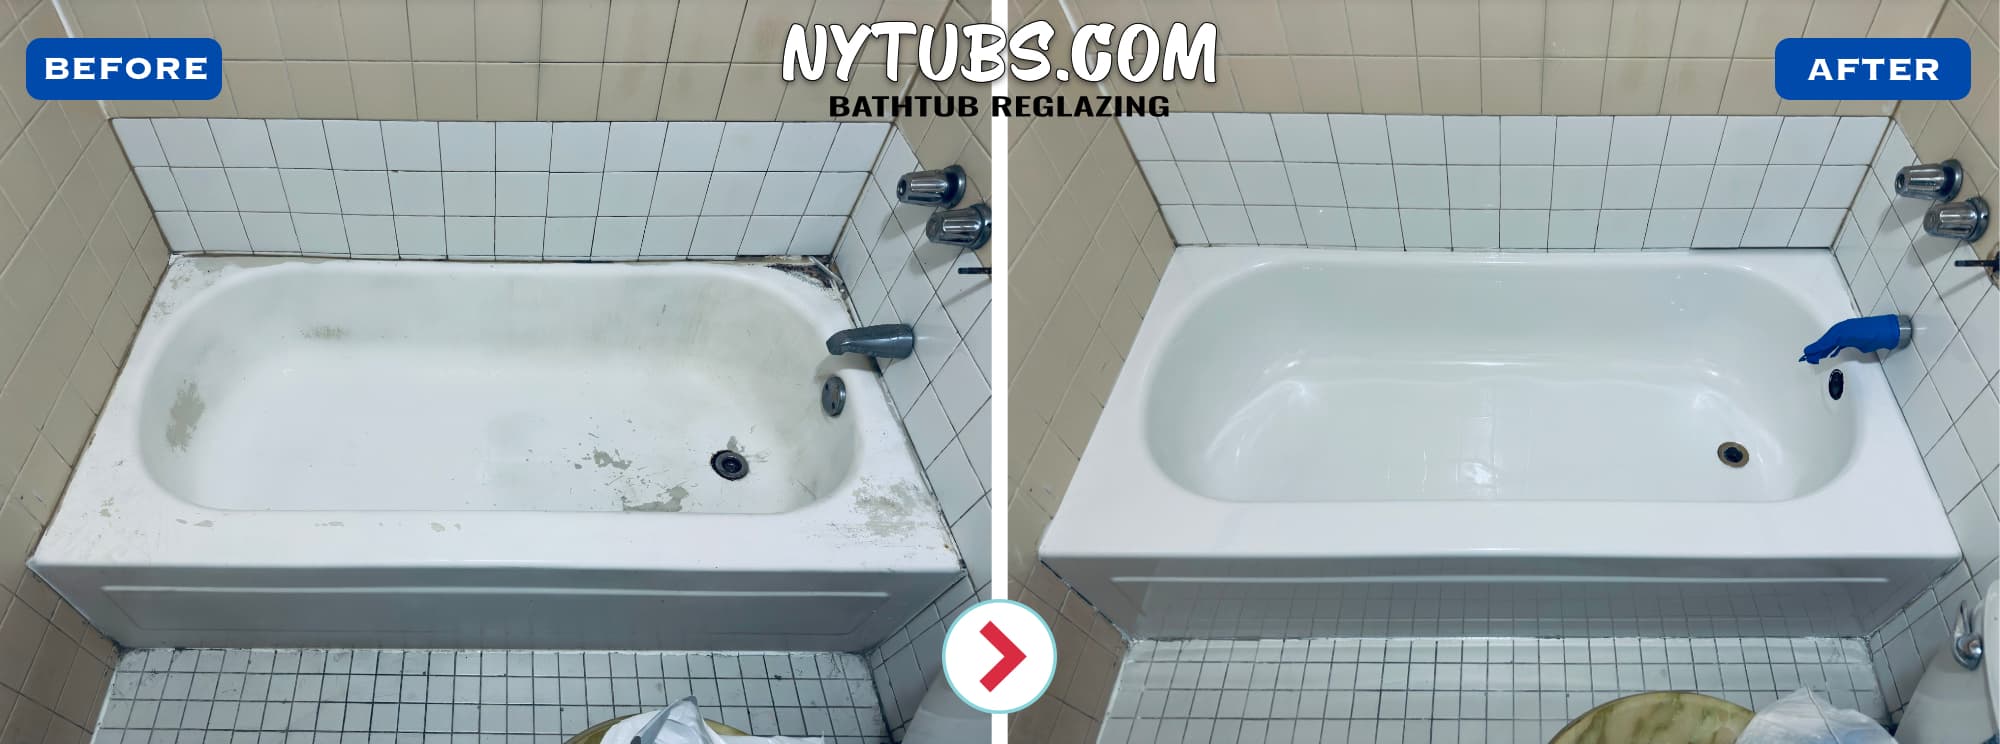 Bathtub Restoration in Brooklyn (Before and After)